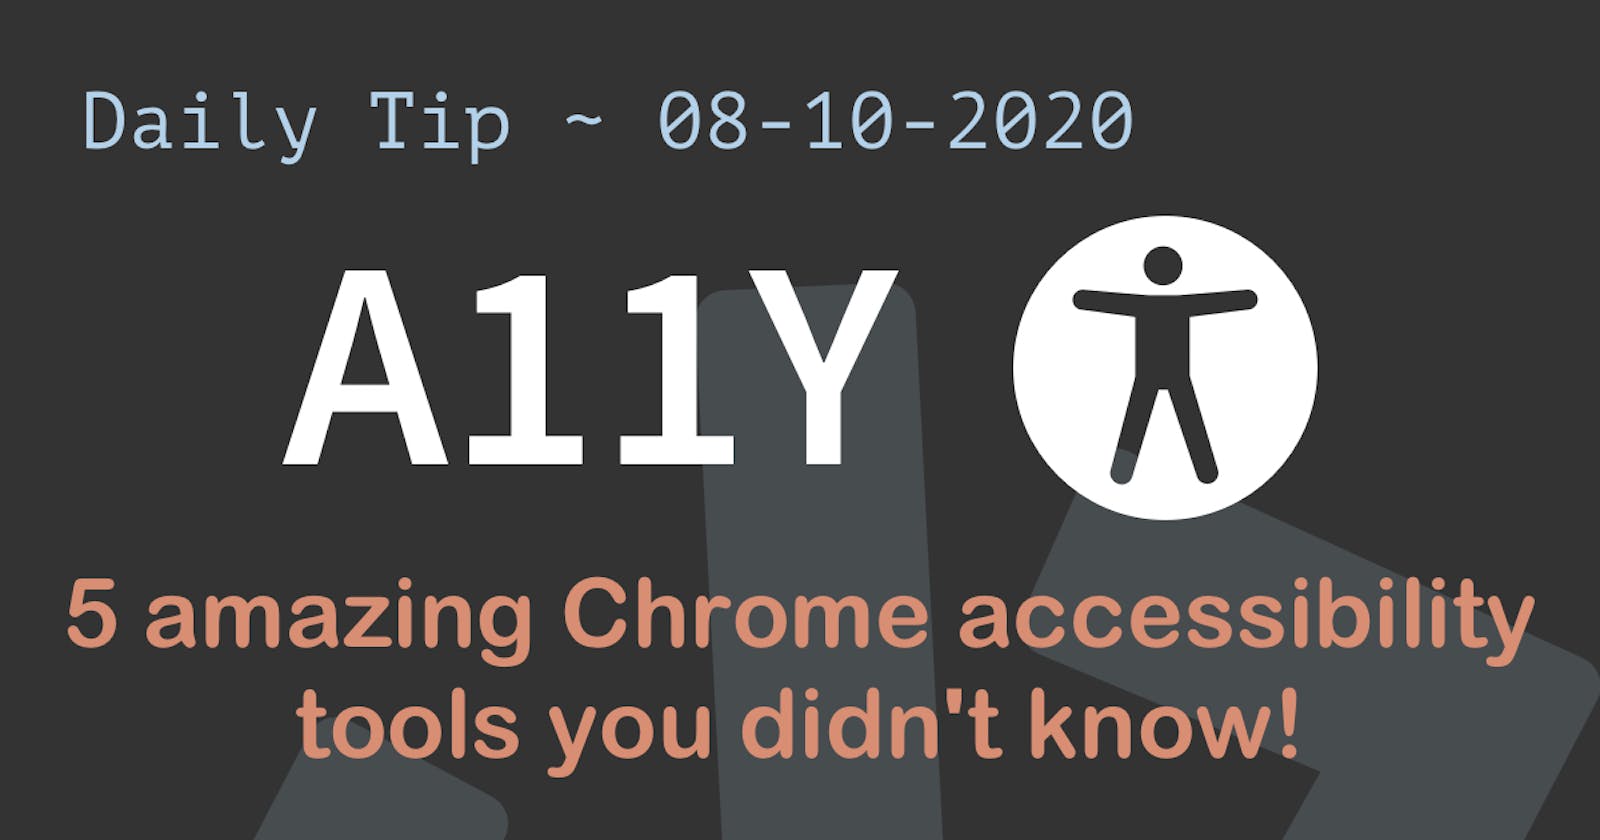 5 amazing Chrome accessibility tools you didn't know!